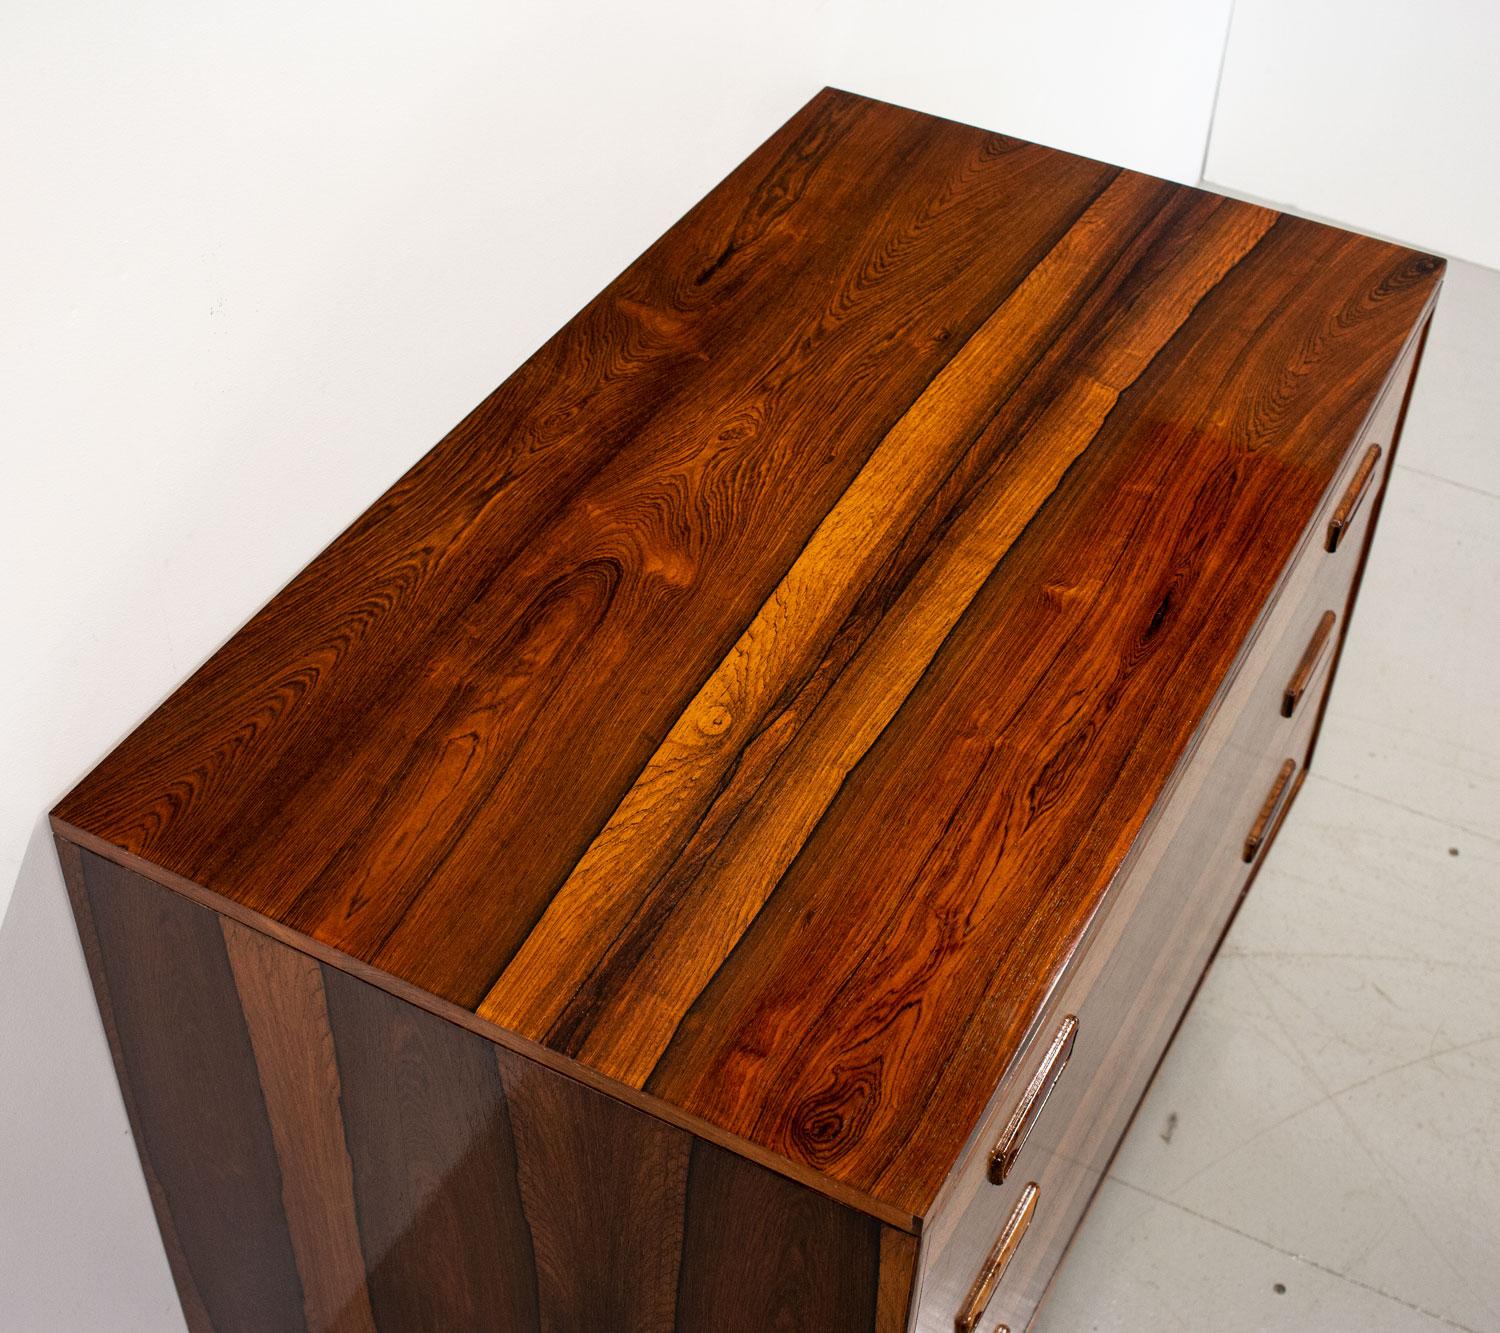 Scandinavian Modern Danish Rosewood Chest of Drawers in the manner of Arne Wahl Iversen, 1960s For Sale